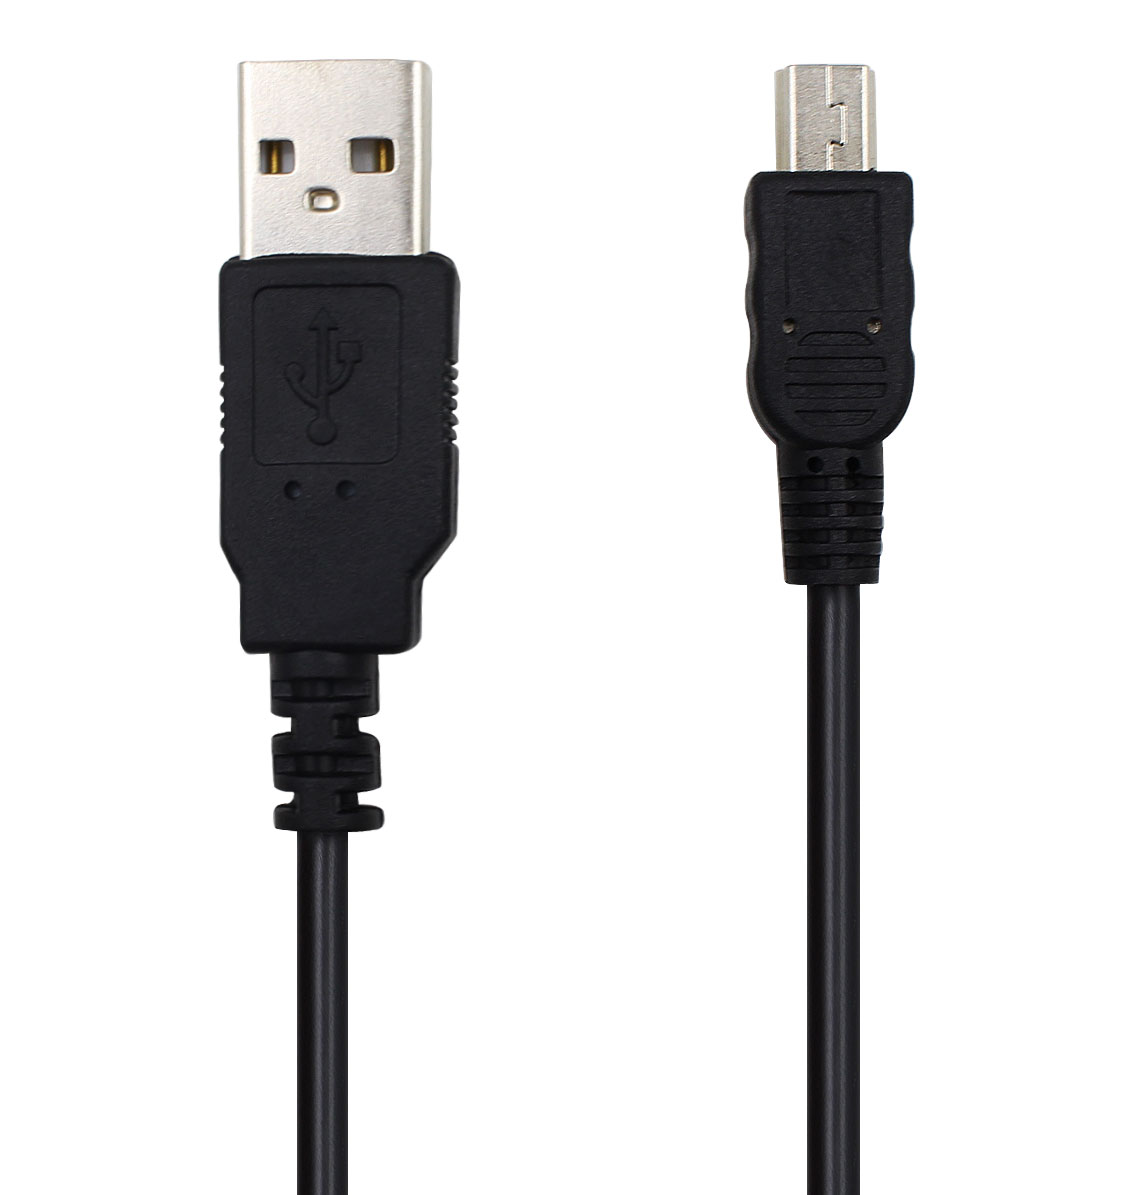 USB Kabel DC/PC Charger Cord Voor Logitech Harmony 300 Afstandsbediening Laptop